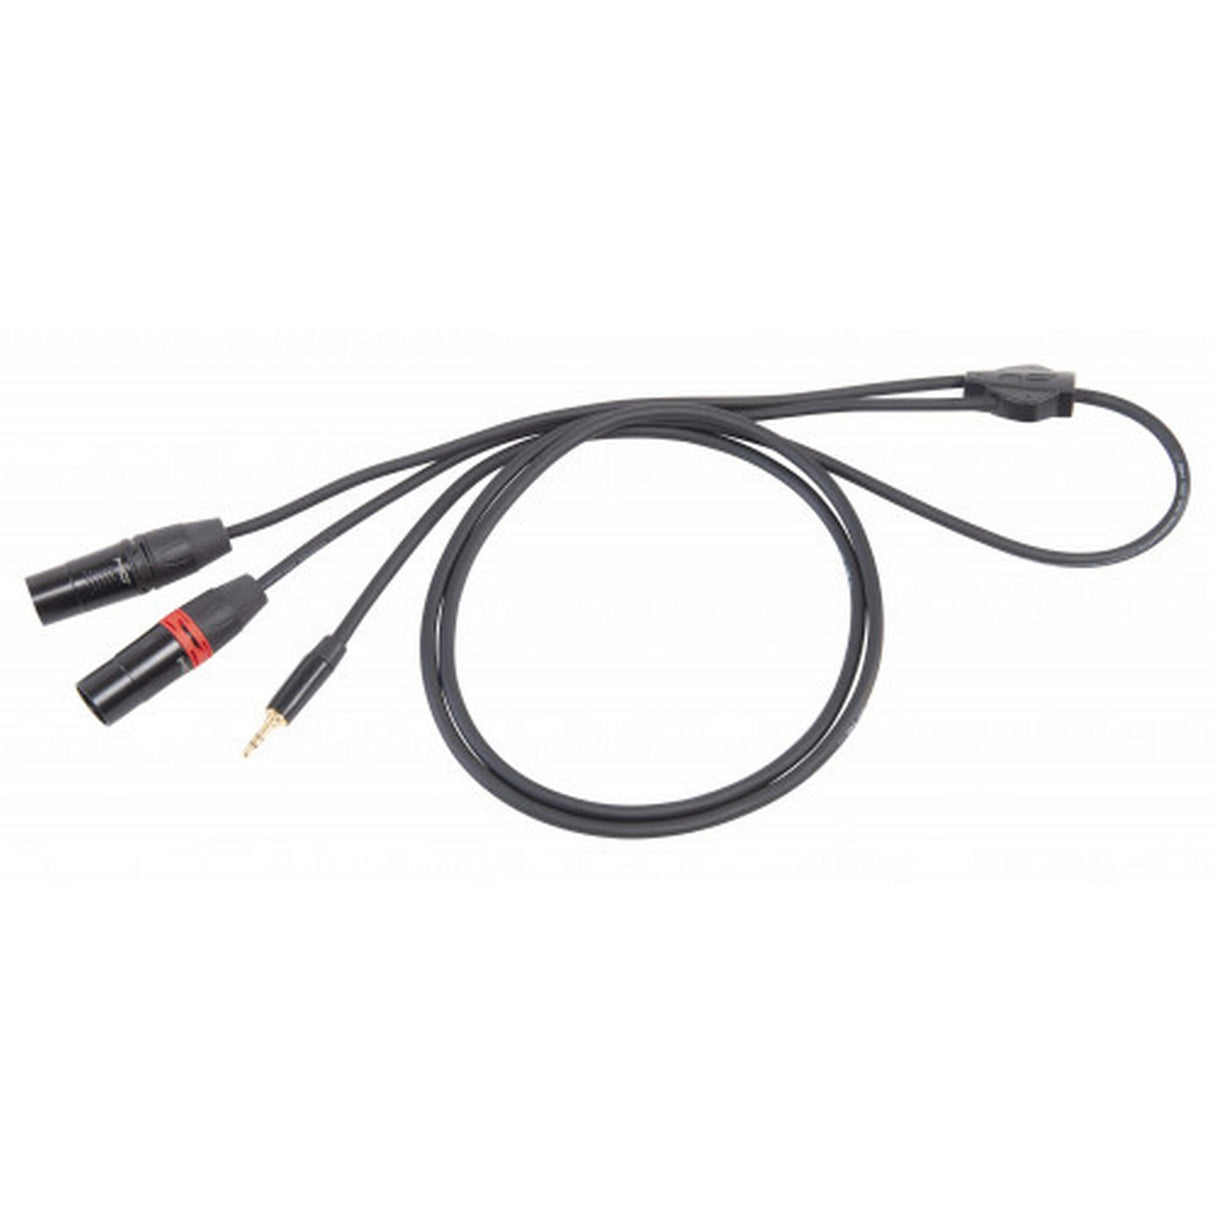 DieHard DHS595LU18 ONEHERO Professional Stereo Cable, 1.8 m